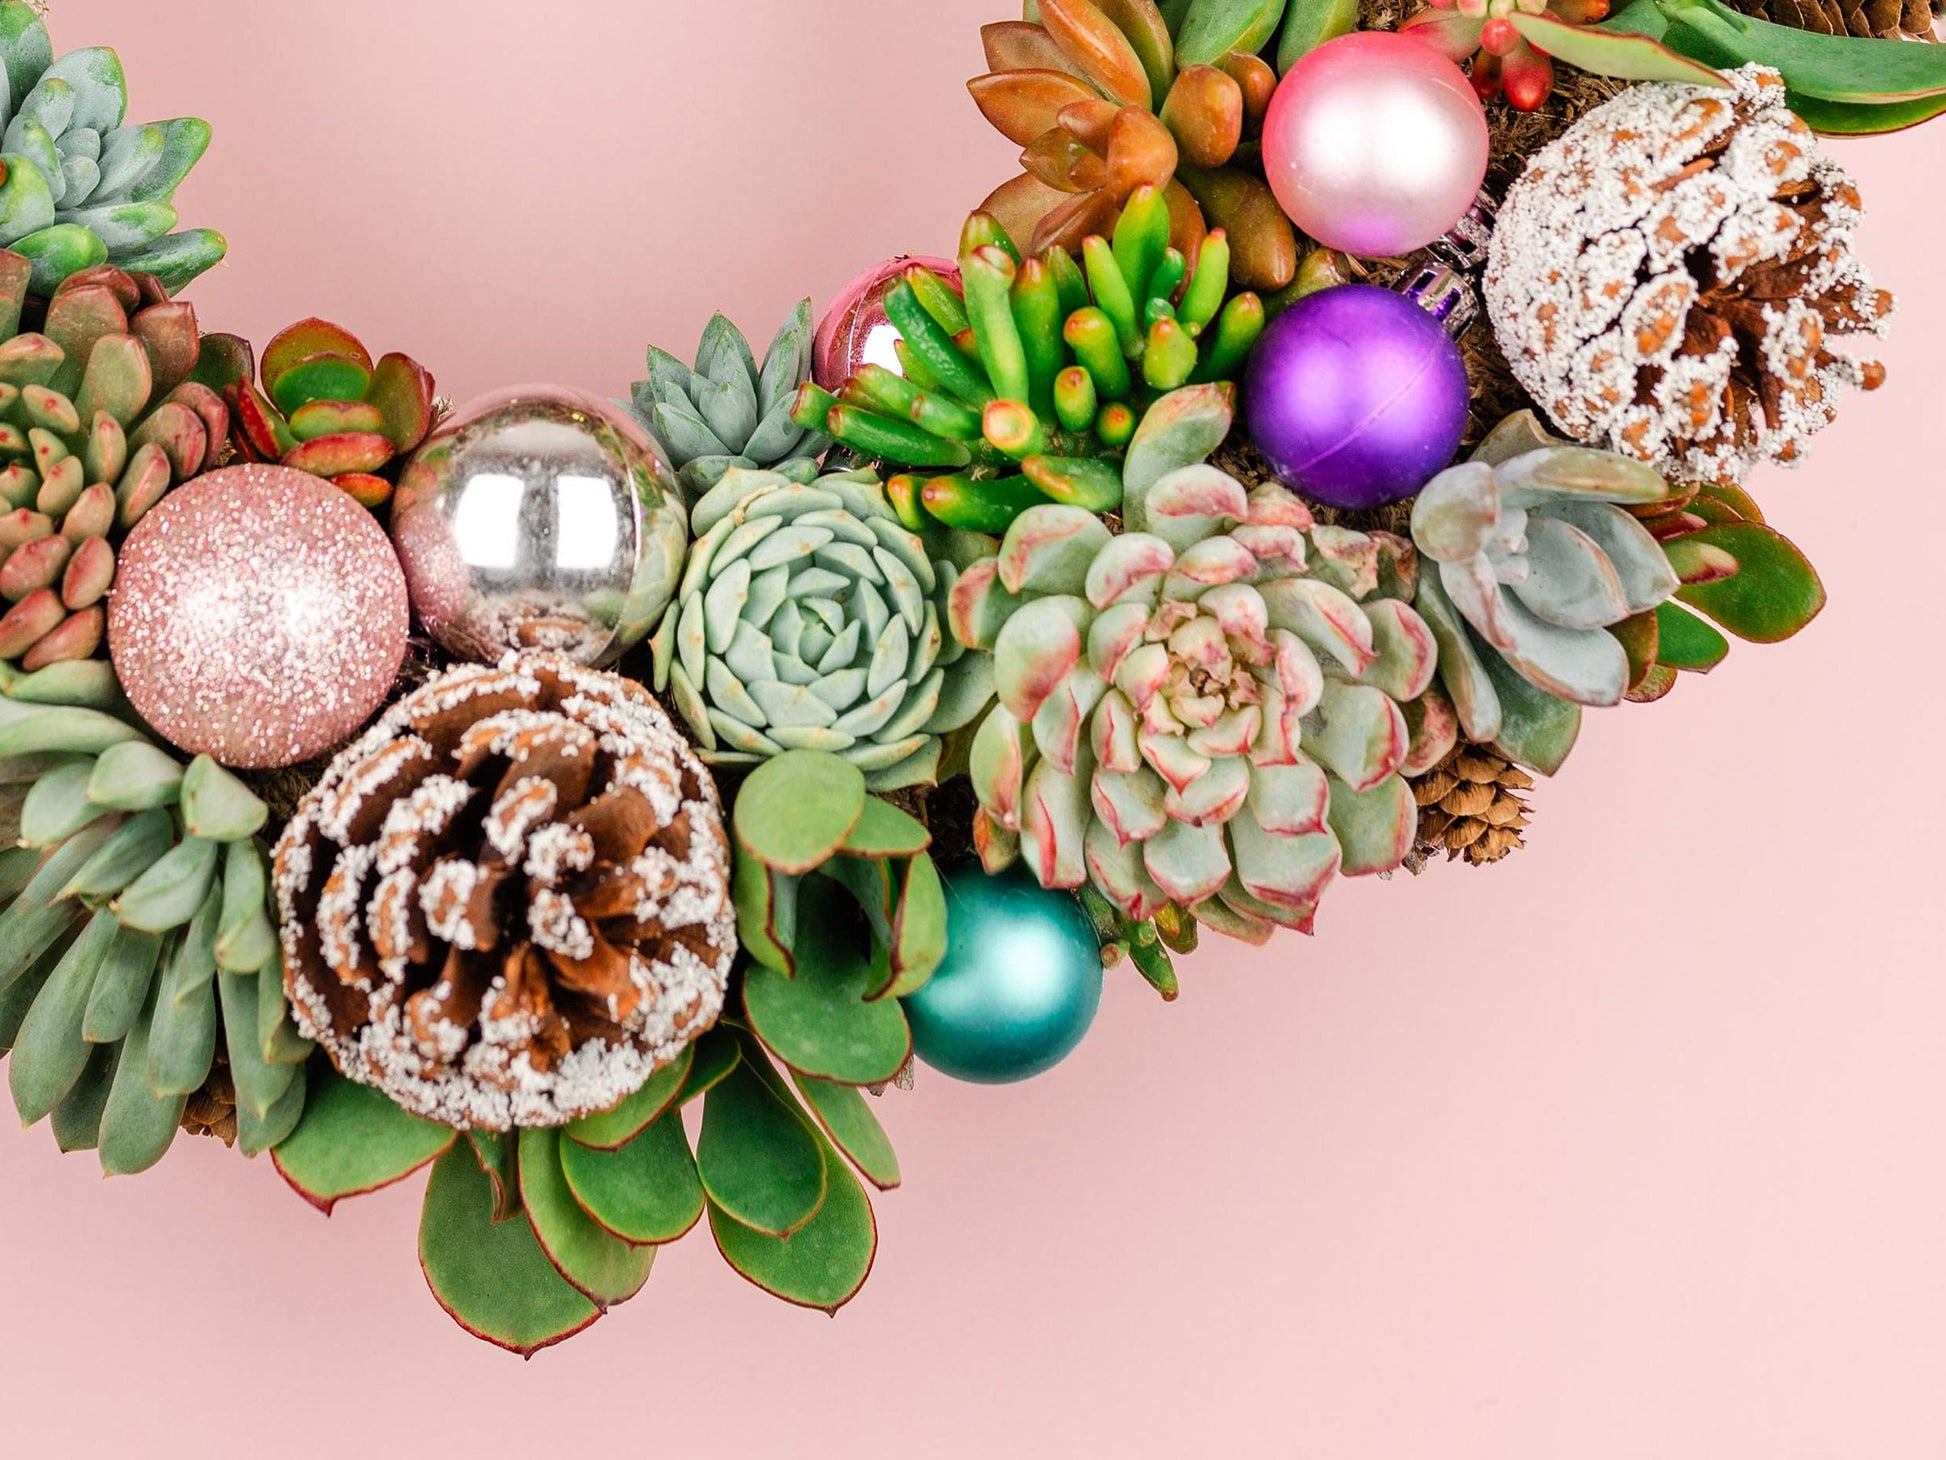 Pastel Christmas Succulent Wreath with Living Pink and Purple Plants, Ornaments, and Pine Cones for Front Door Entry, Holiday Decorating